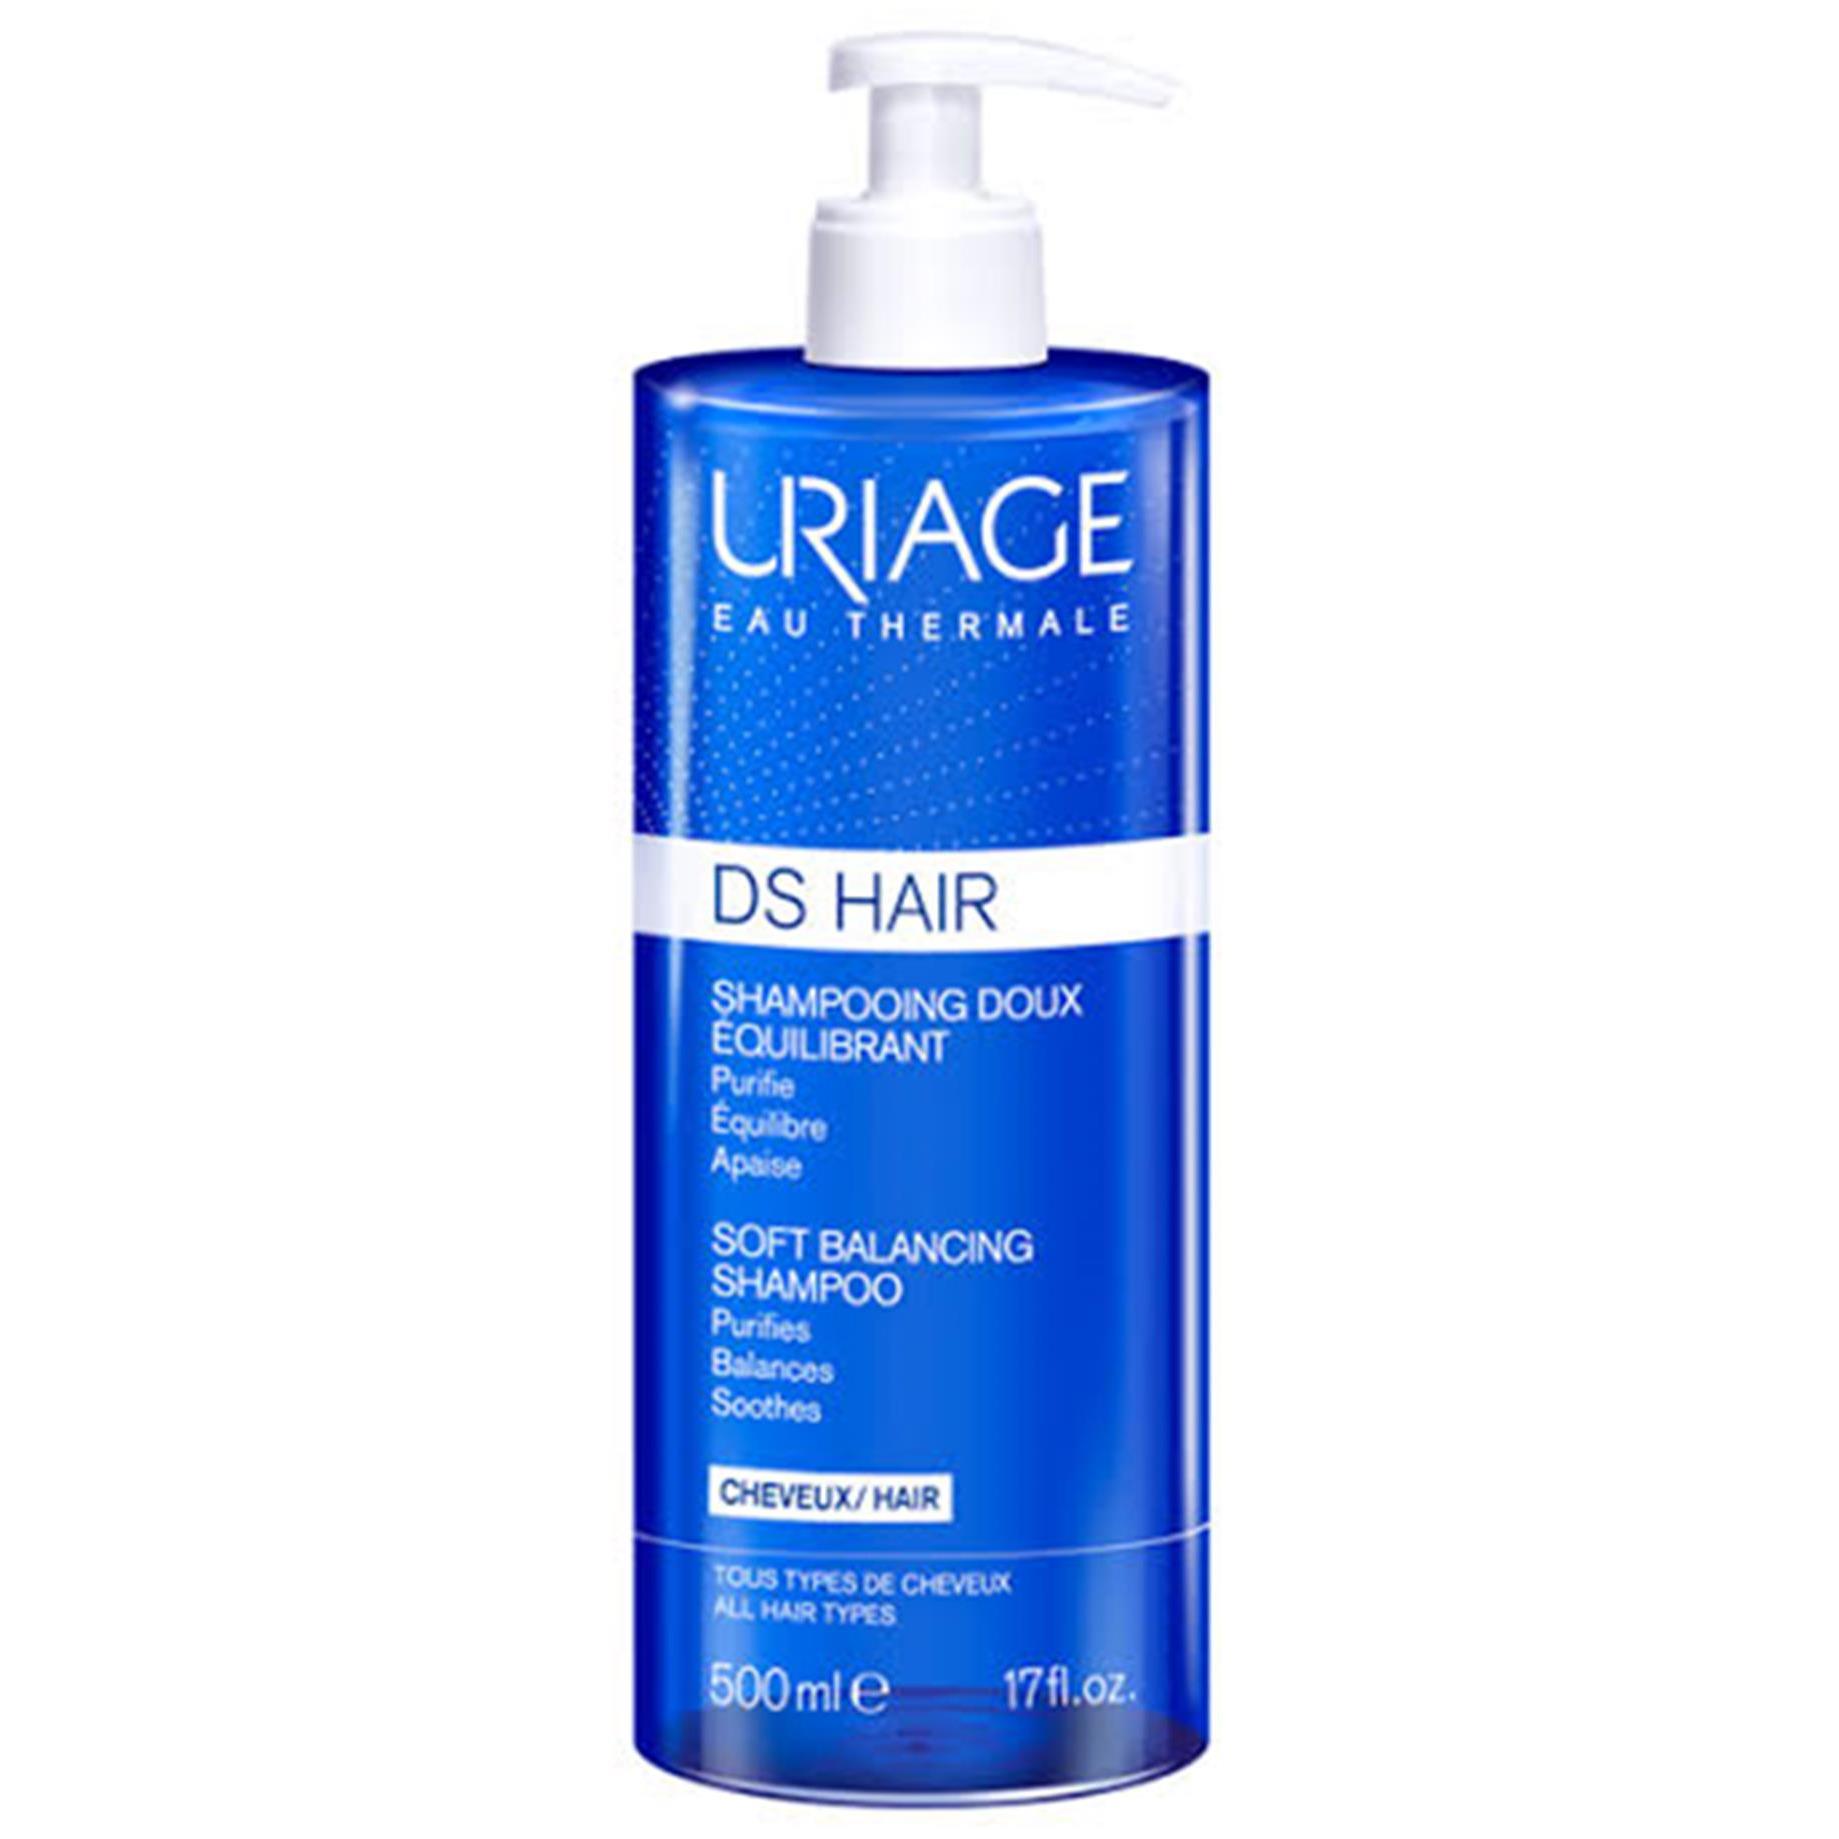 URIAGE - SHAMPOO [DS HAIR EQUILIBRANT] [500 ML]